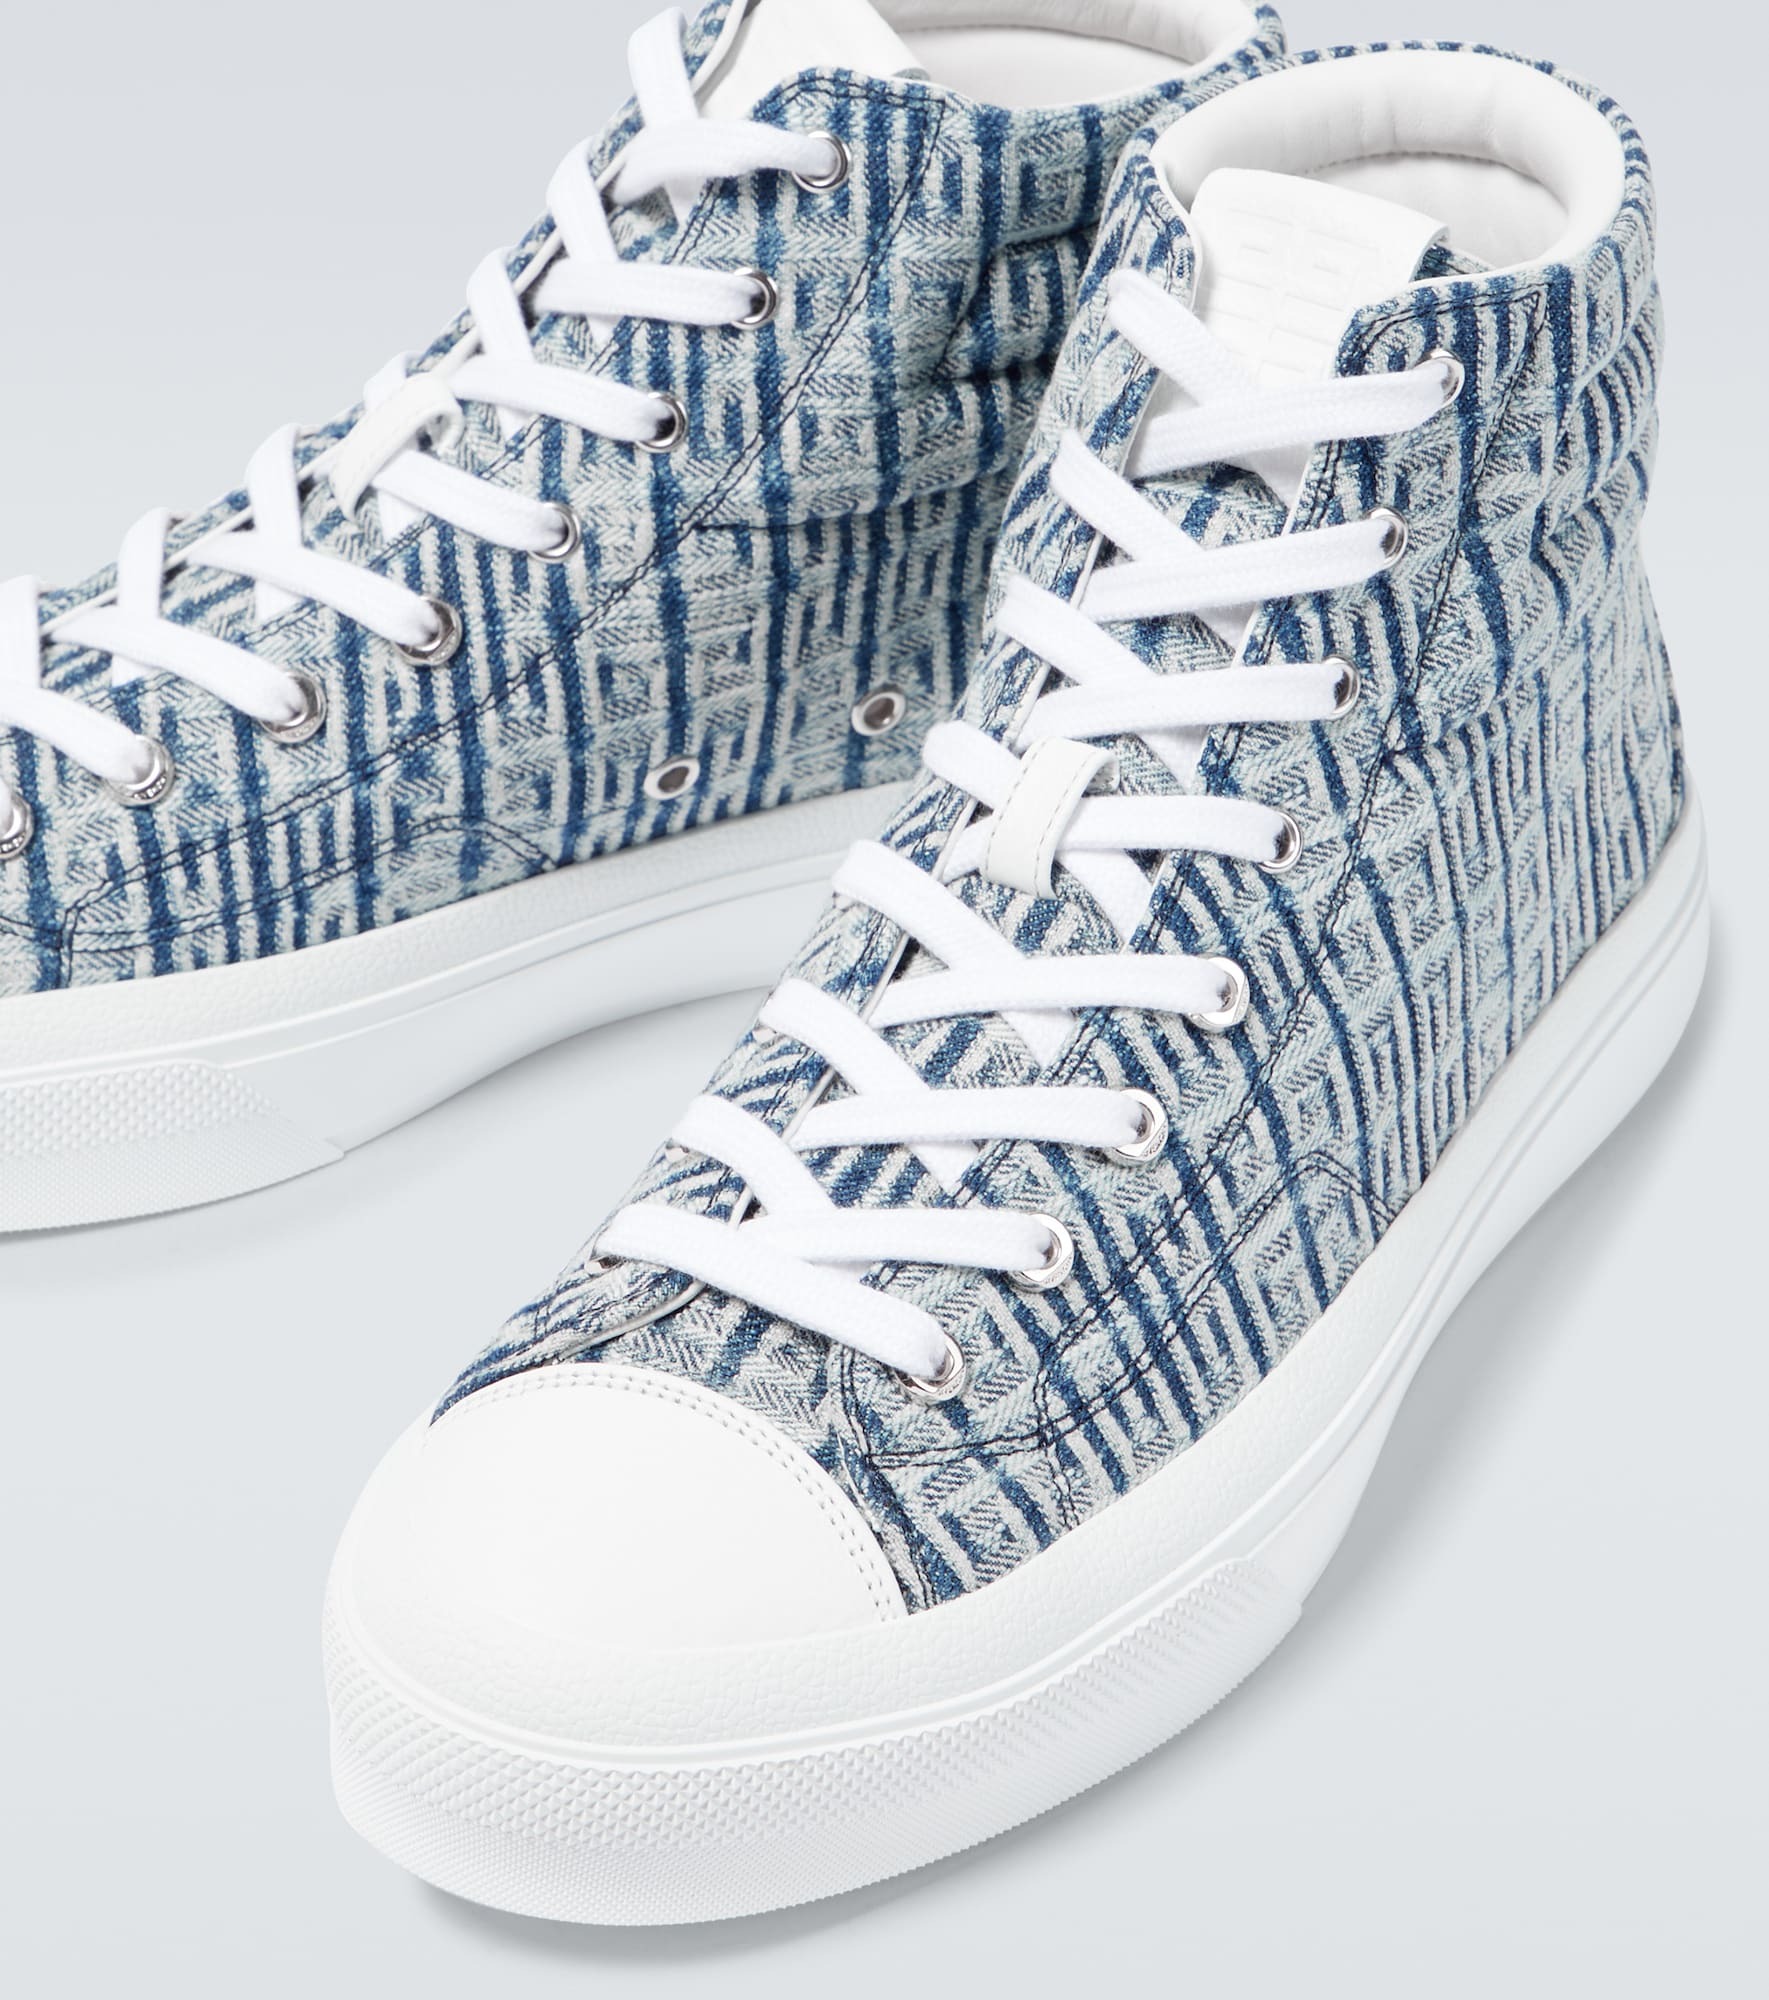 Givenchy - 4G jacquard sneakers Givenchy